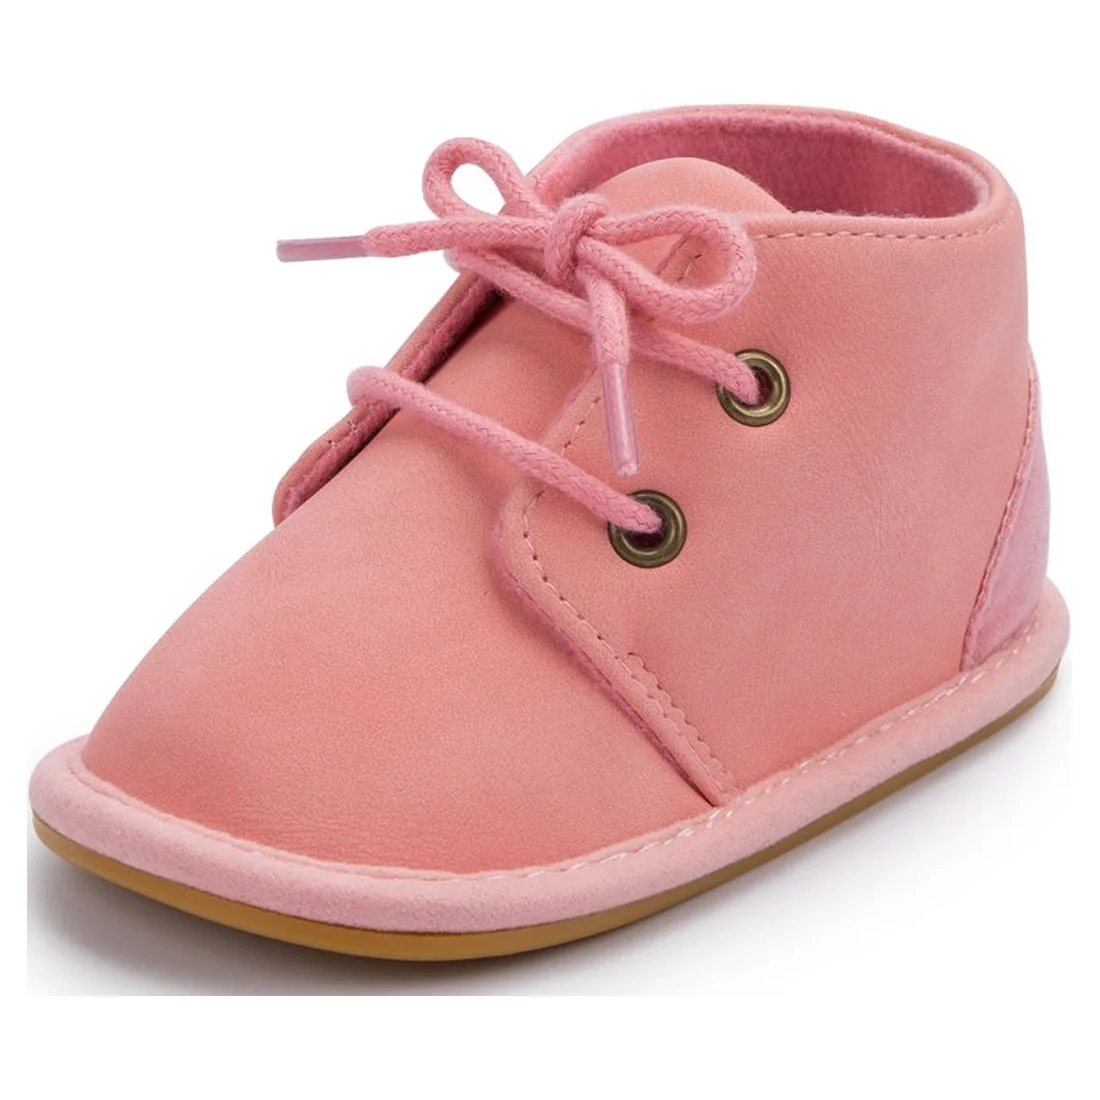 Baby Girls Boys Boots Infant Lace Up Booties Winter Shoes